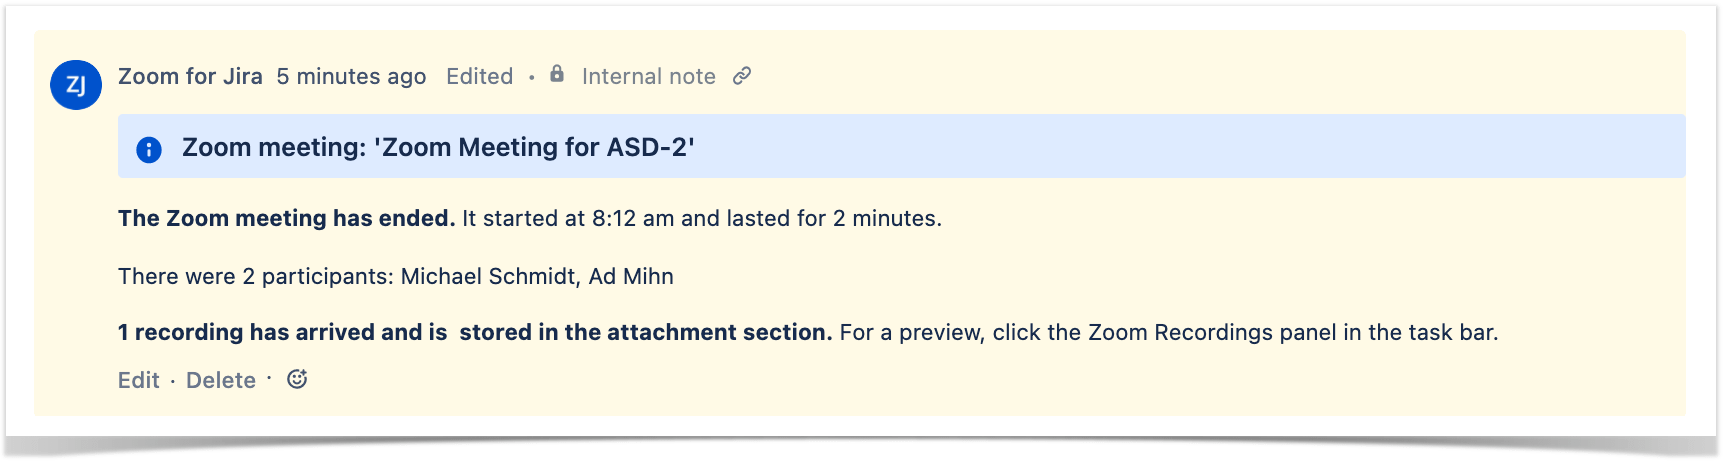 internal comment in Jira with a notification that a Zoom meeting has ended and will be stored